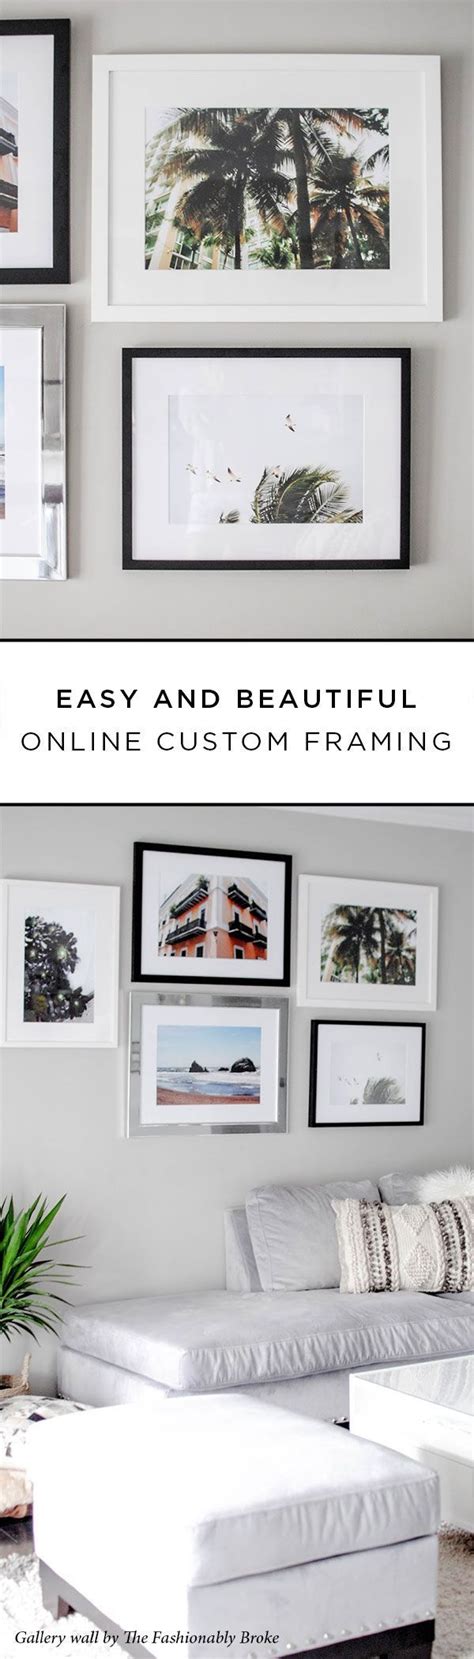 Framebridge Makes It Easy To Update Your Home With The Art And